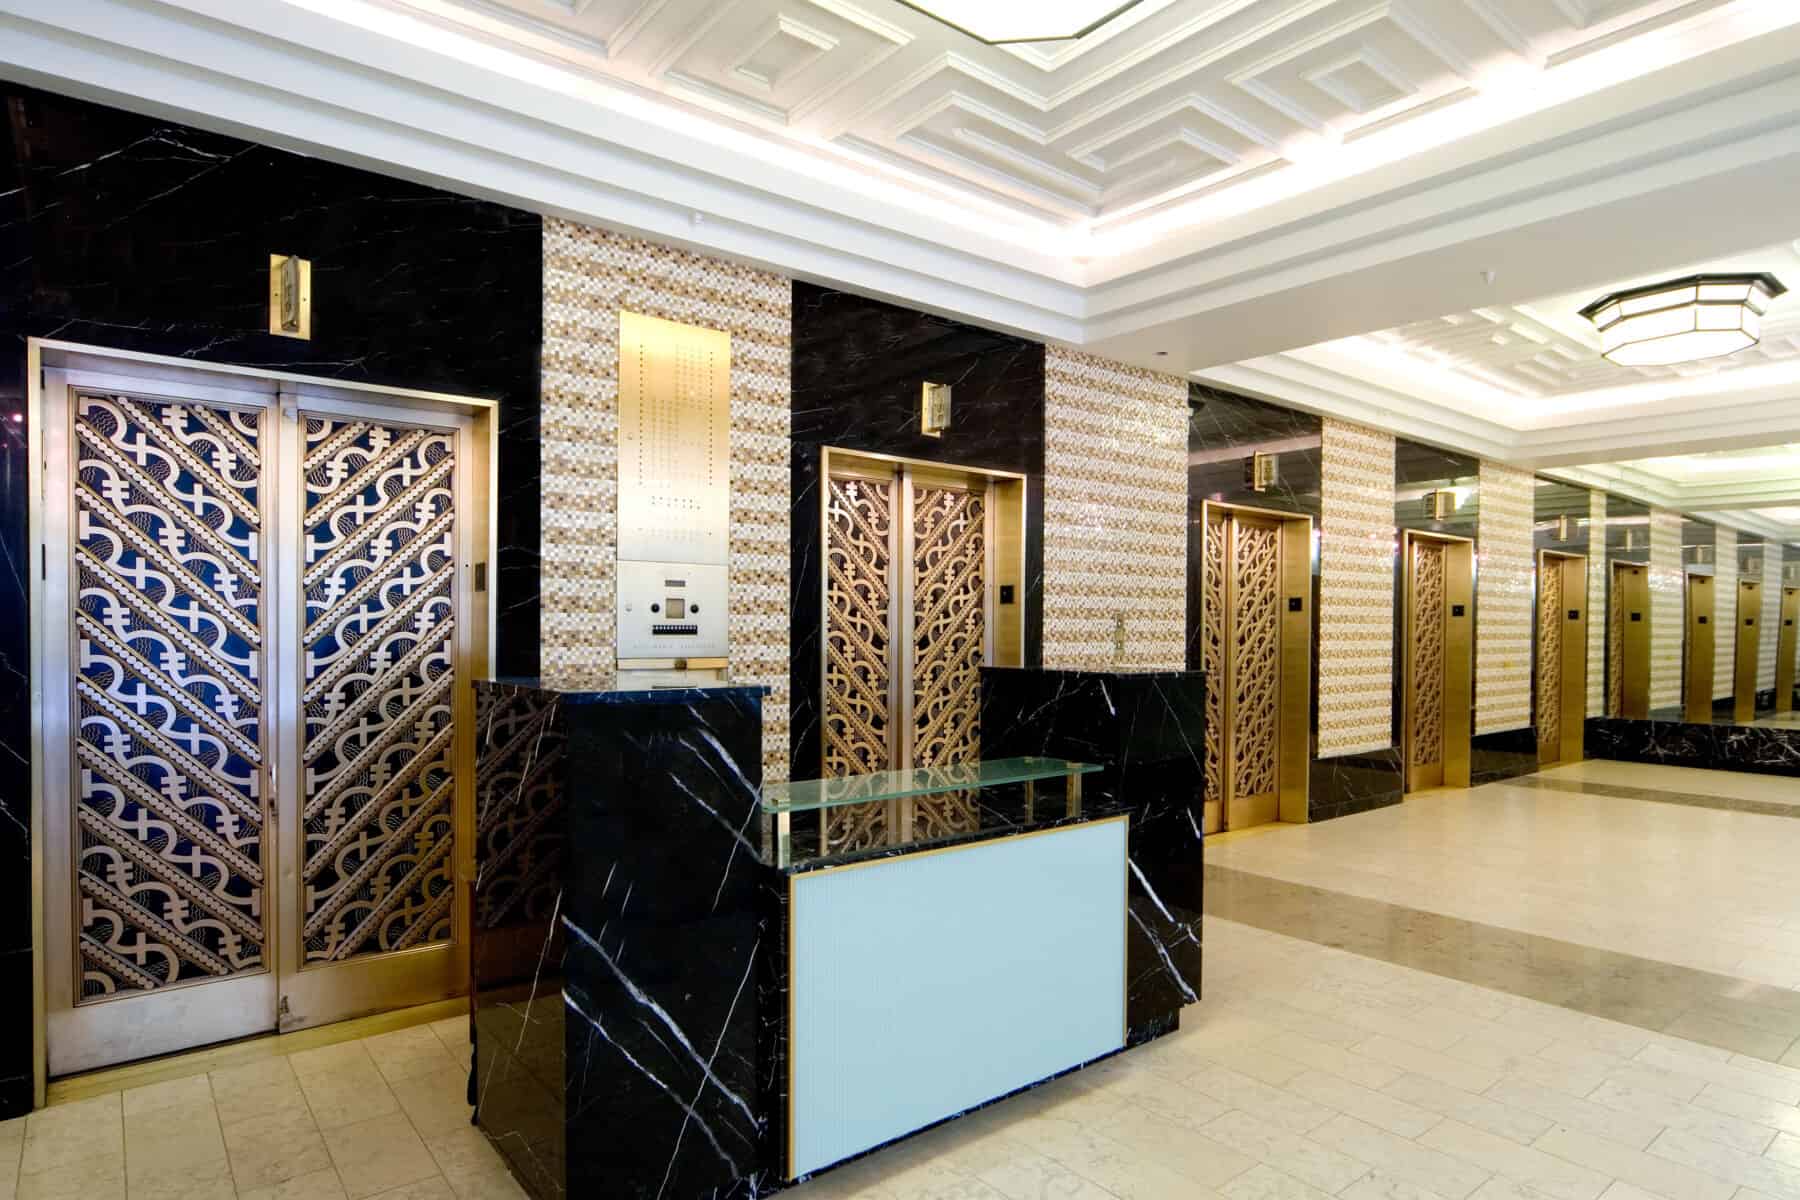 Intricate Art Deco La Salle Street Lobby Remodel Including Metal and Stonework by Commercial Builder & General Contractor Structural EnterprisesRemodel including Custom Glass Ceiling by Commercial Builder & General Contractor Structural Enterprises